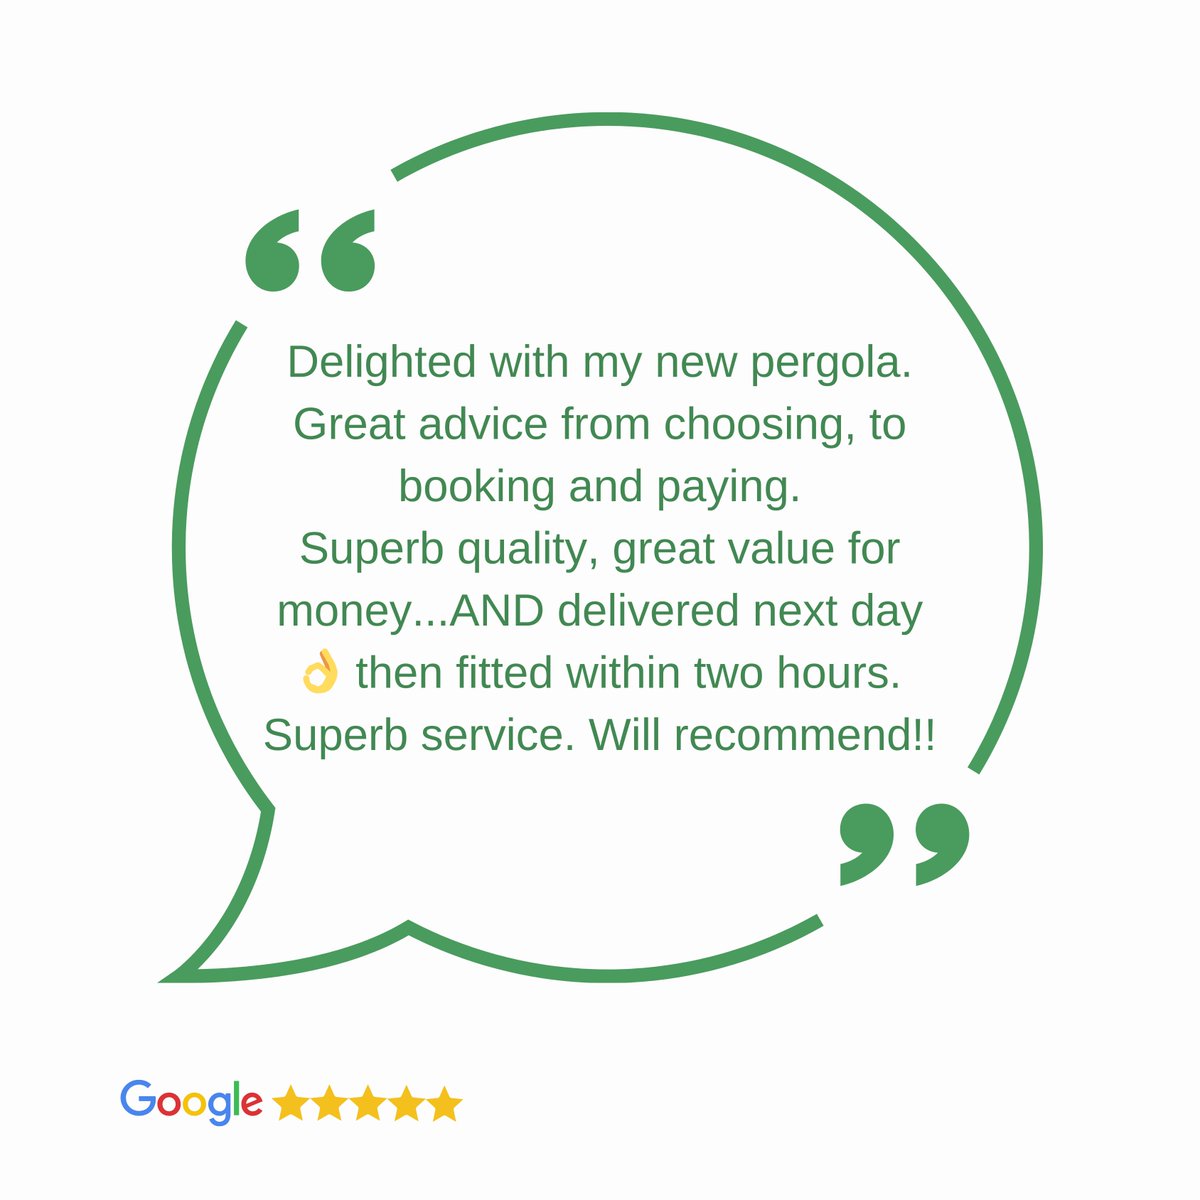 We're rated 5 stars on Google!⭐

It's always fantastic to hear such lovely feedback, read more customer reviews over on our website!

#GardenFurnitureUK #GardenFurniture #GardenDesign